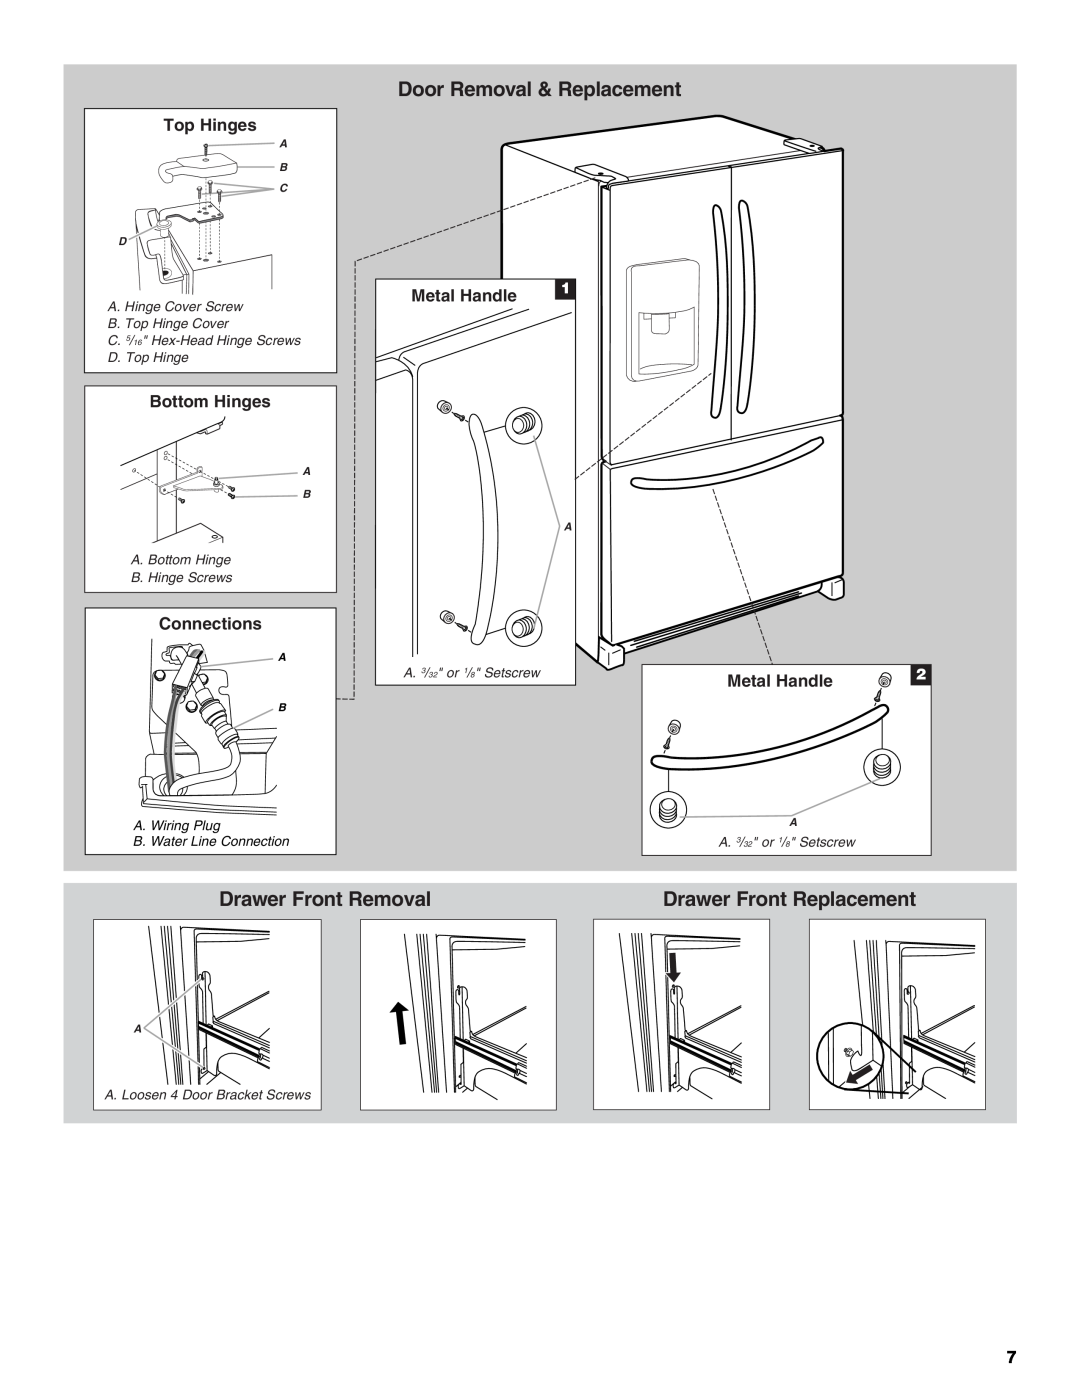 Jenn-Air W10329370A Door Removal & Replacement, Drawer Front Removal, Drawer Front Replacement, Top Hinges, Bottom Hinges 